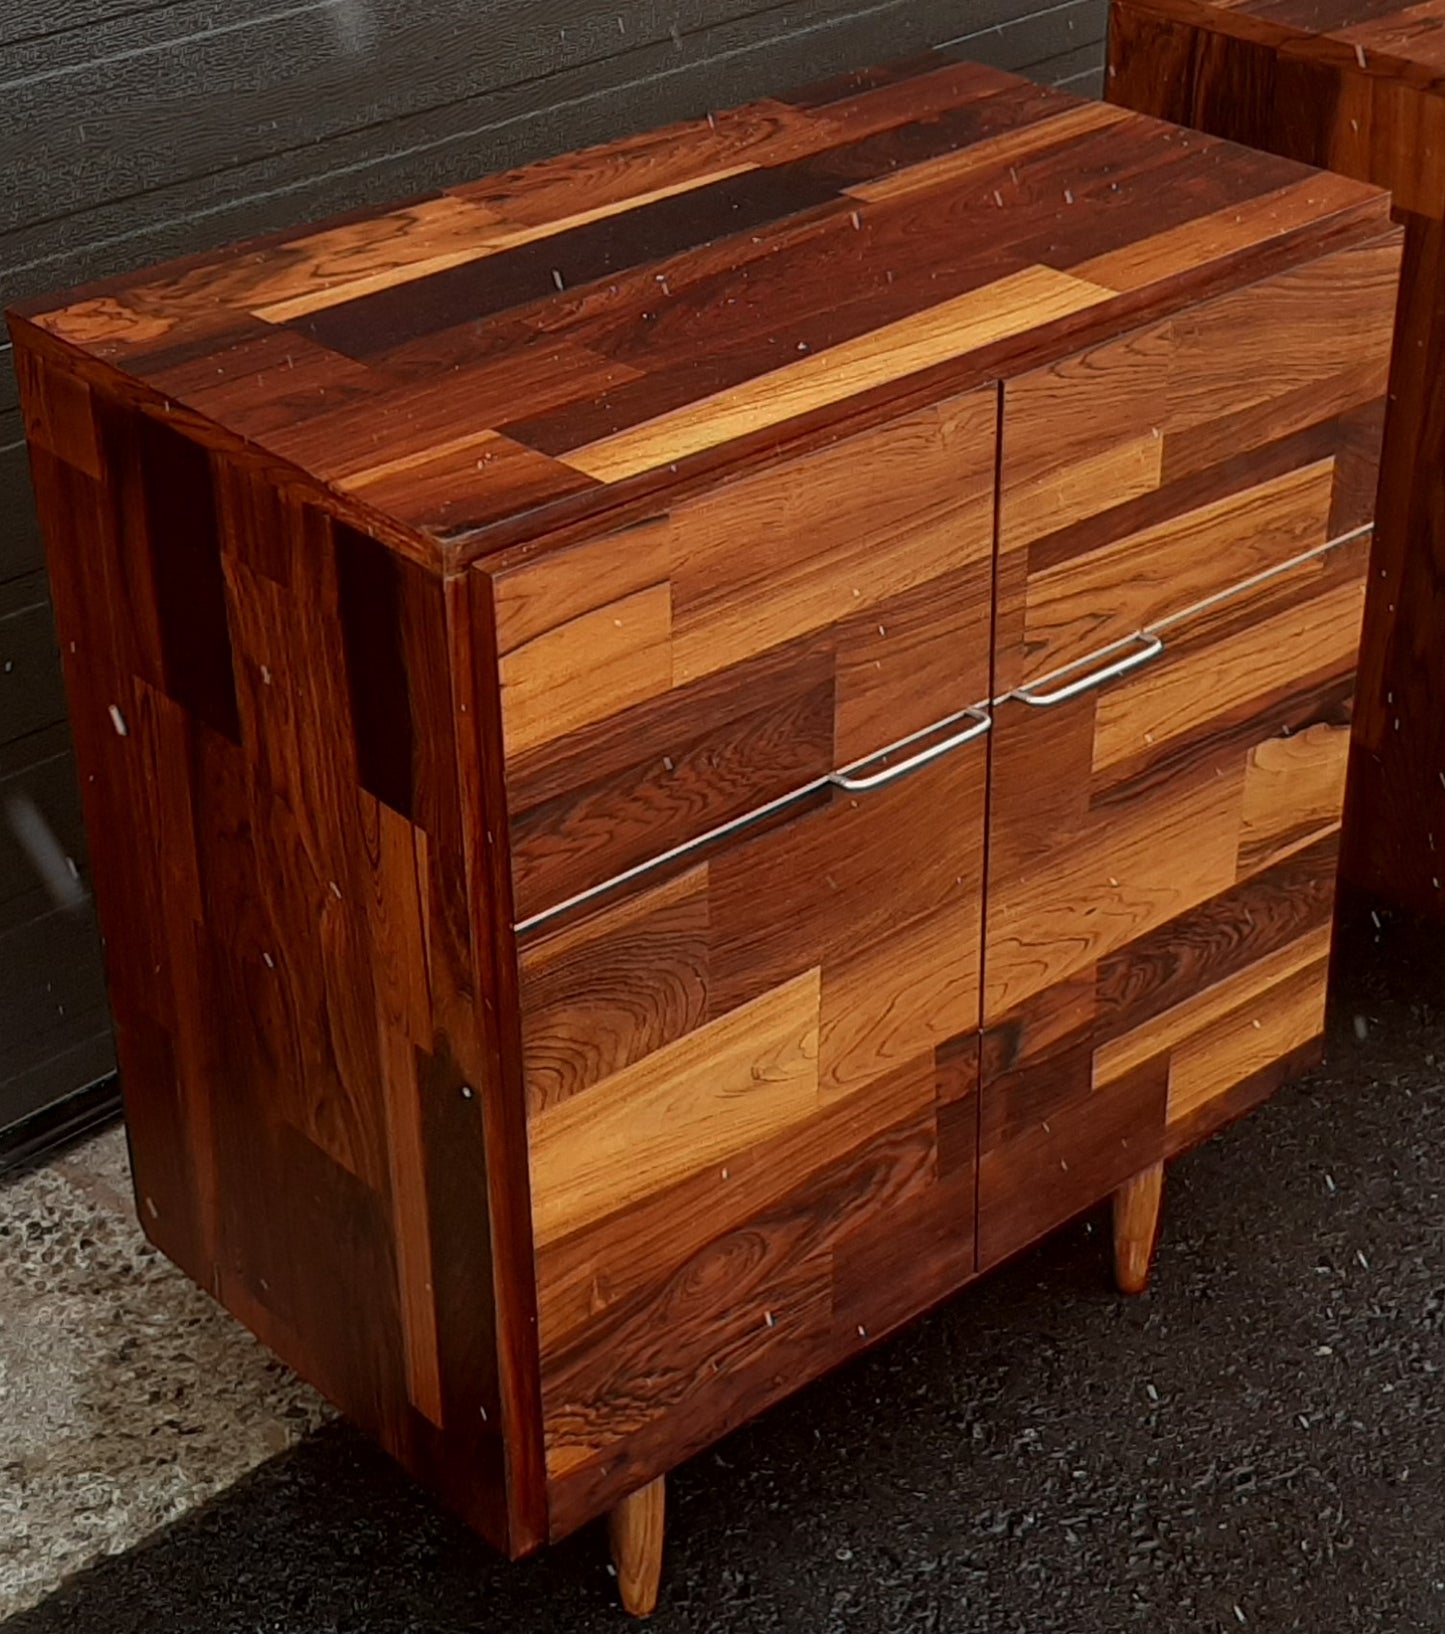 REFINISHED MCM Rosewood Patchwork Cabinet with 2 doors 28", perfect